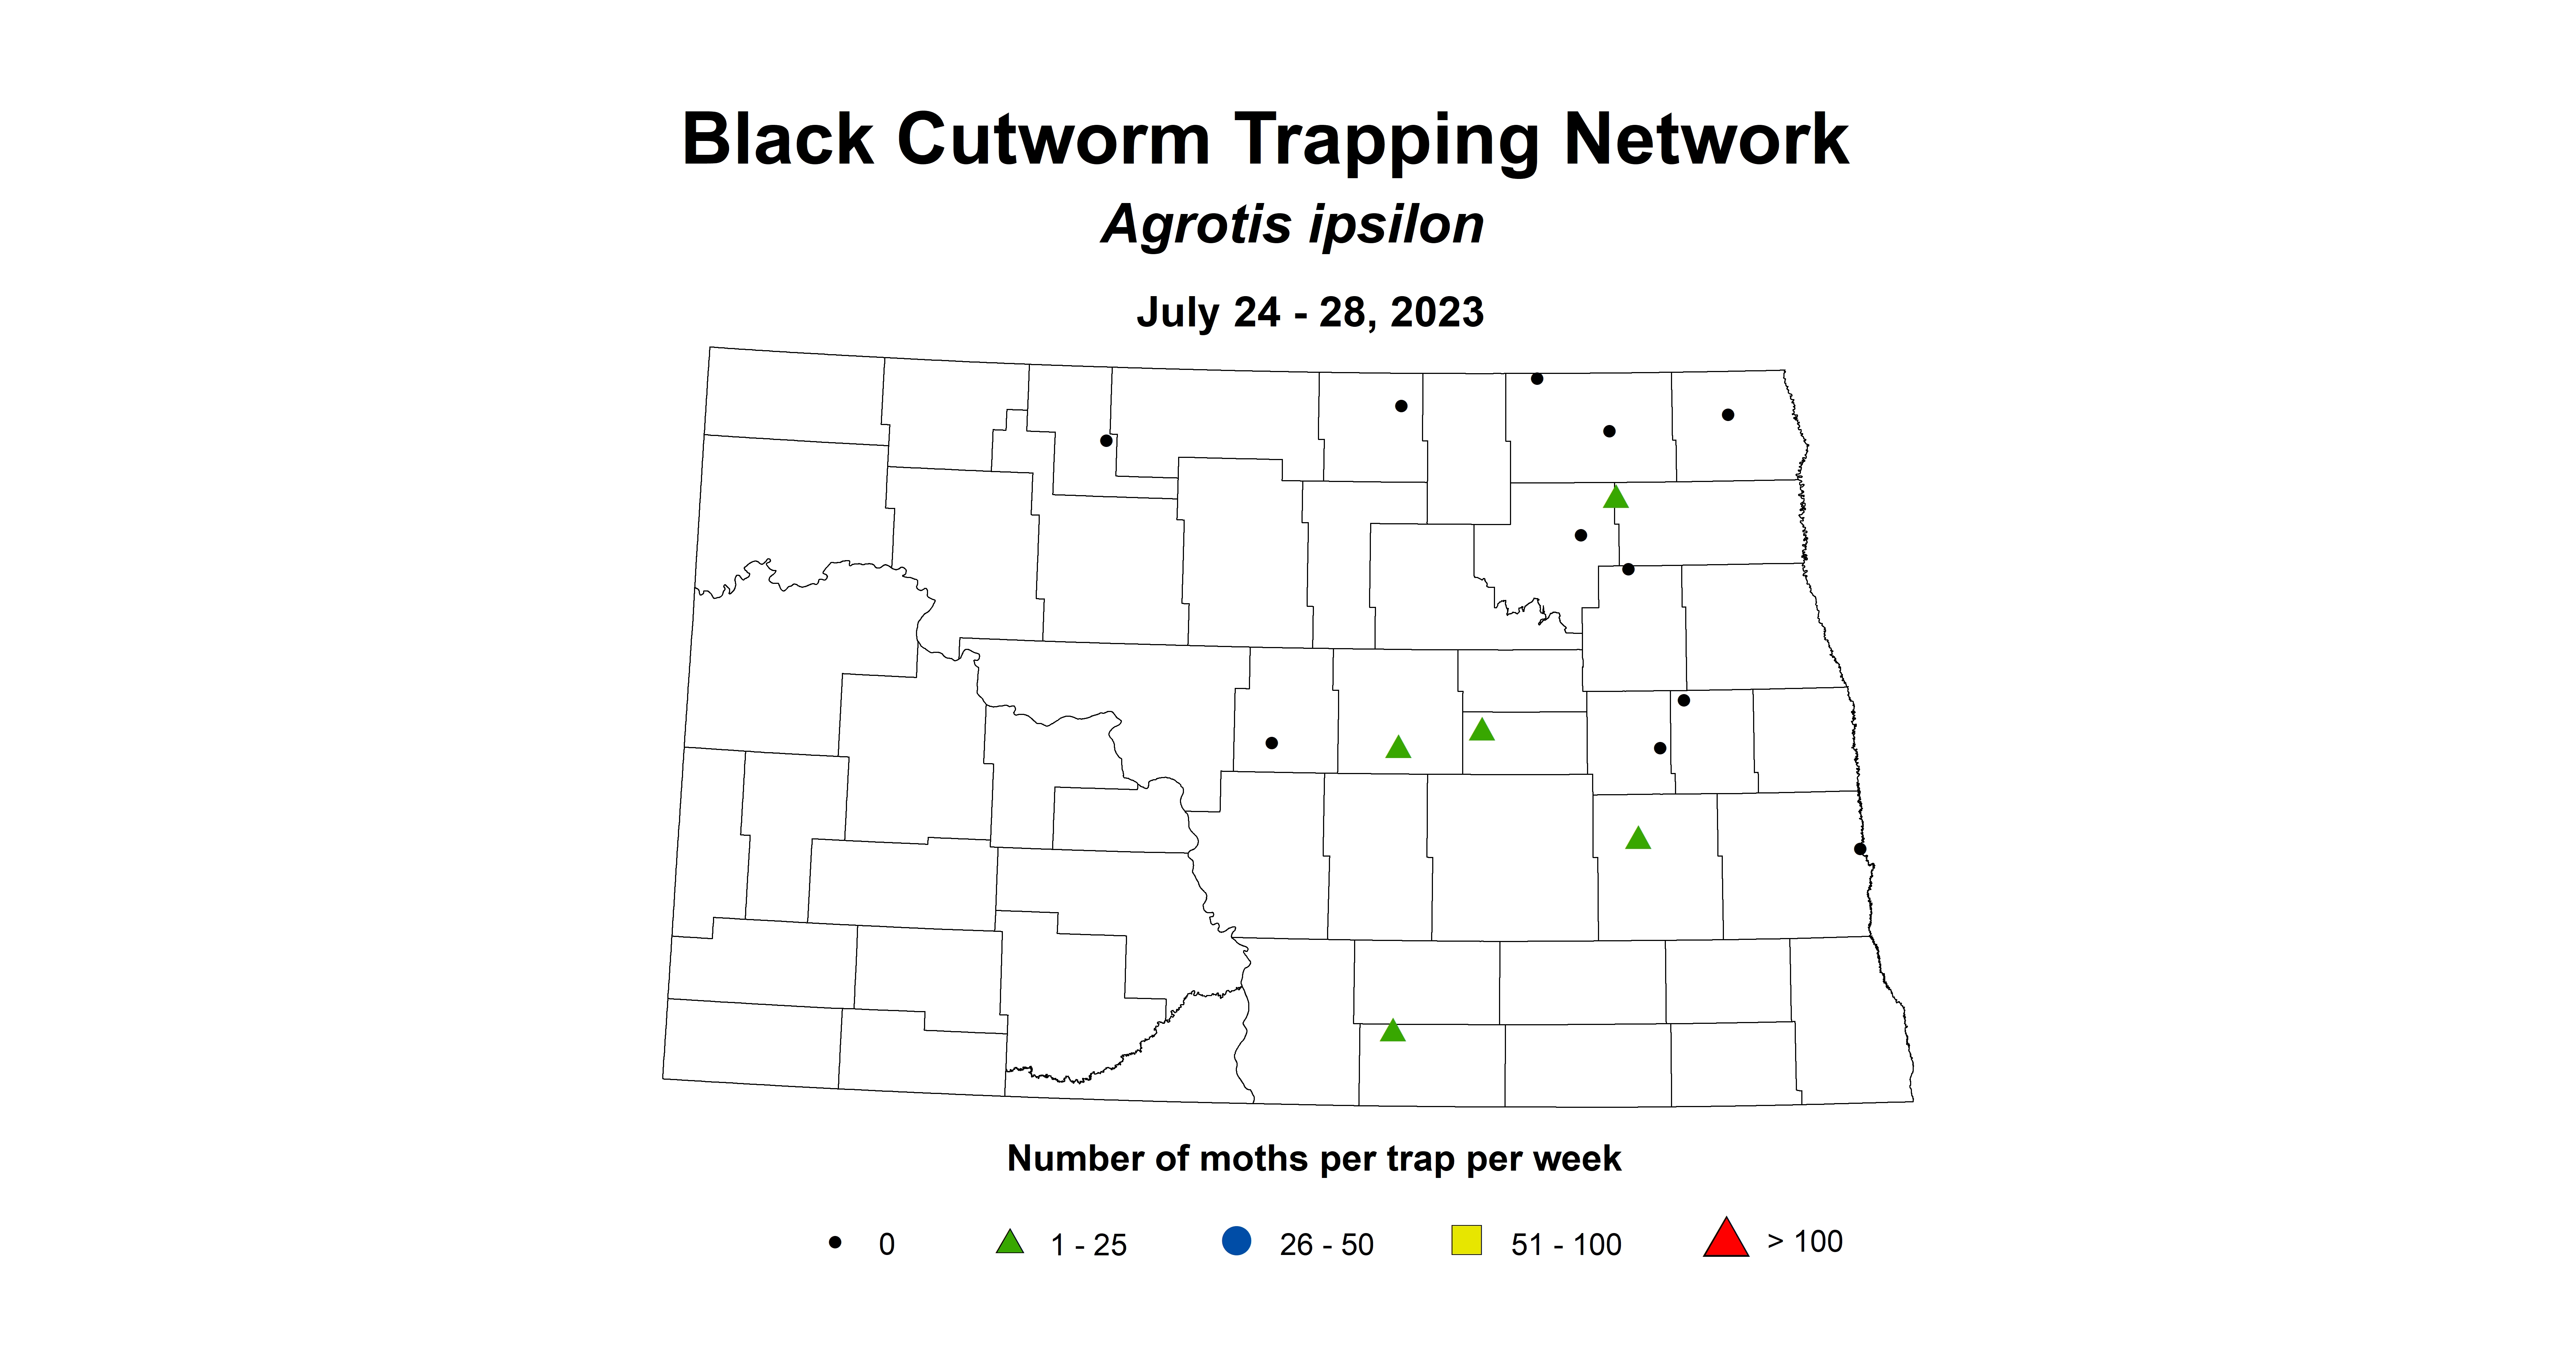 wheat insecttrap black cutoworm July 24-28 2023